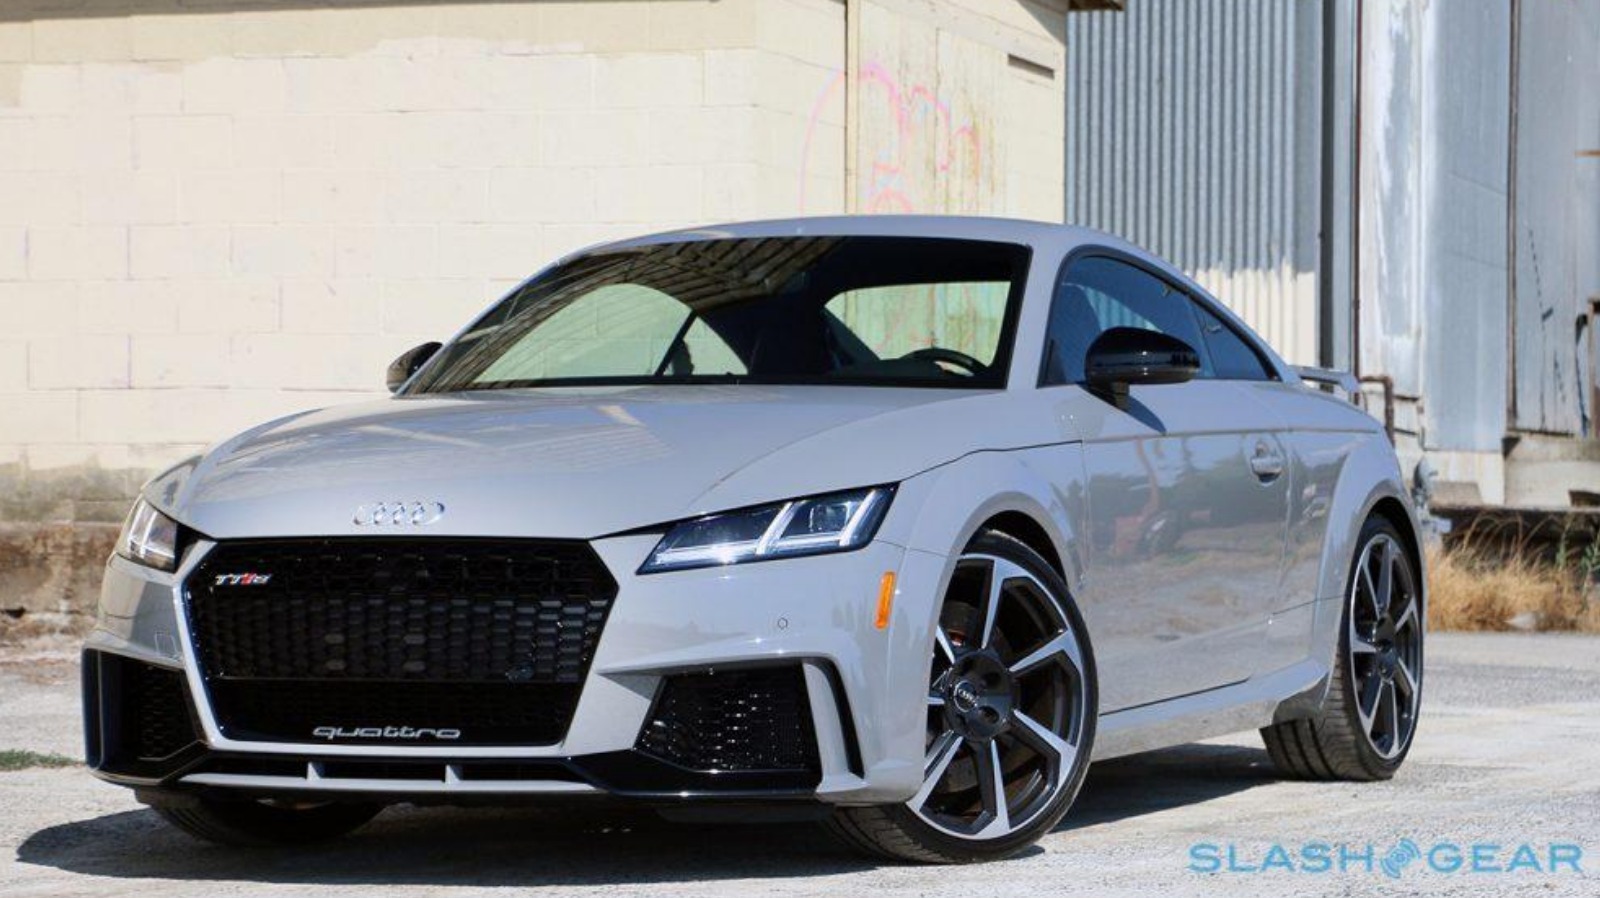 fysiker Ydmyg Parametre 2018 Audi TT RS Review: The Best Luxury Sports Car For The Money